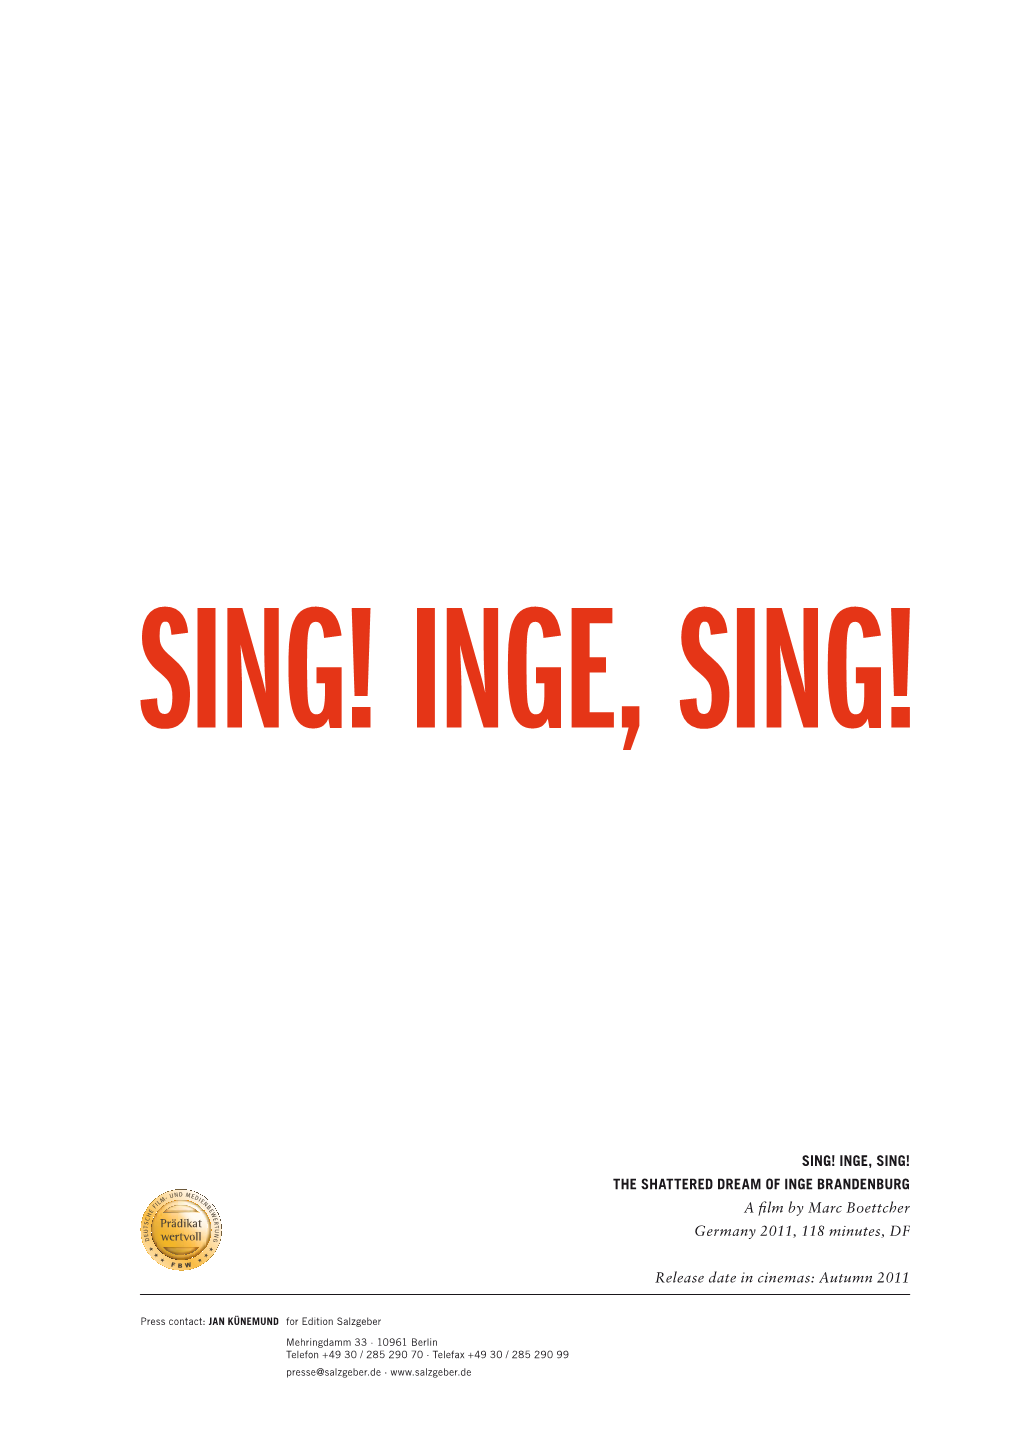 Inge, Sing! the Shattered Dream of Inge Brandenburg a Film by Marc Boettcher Germany 2011, 118 Minutes, DF Release Date In